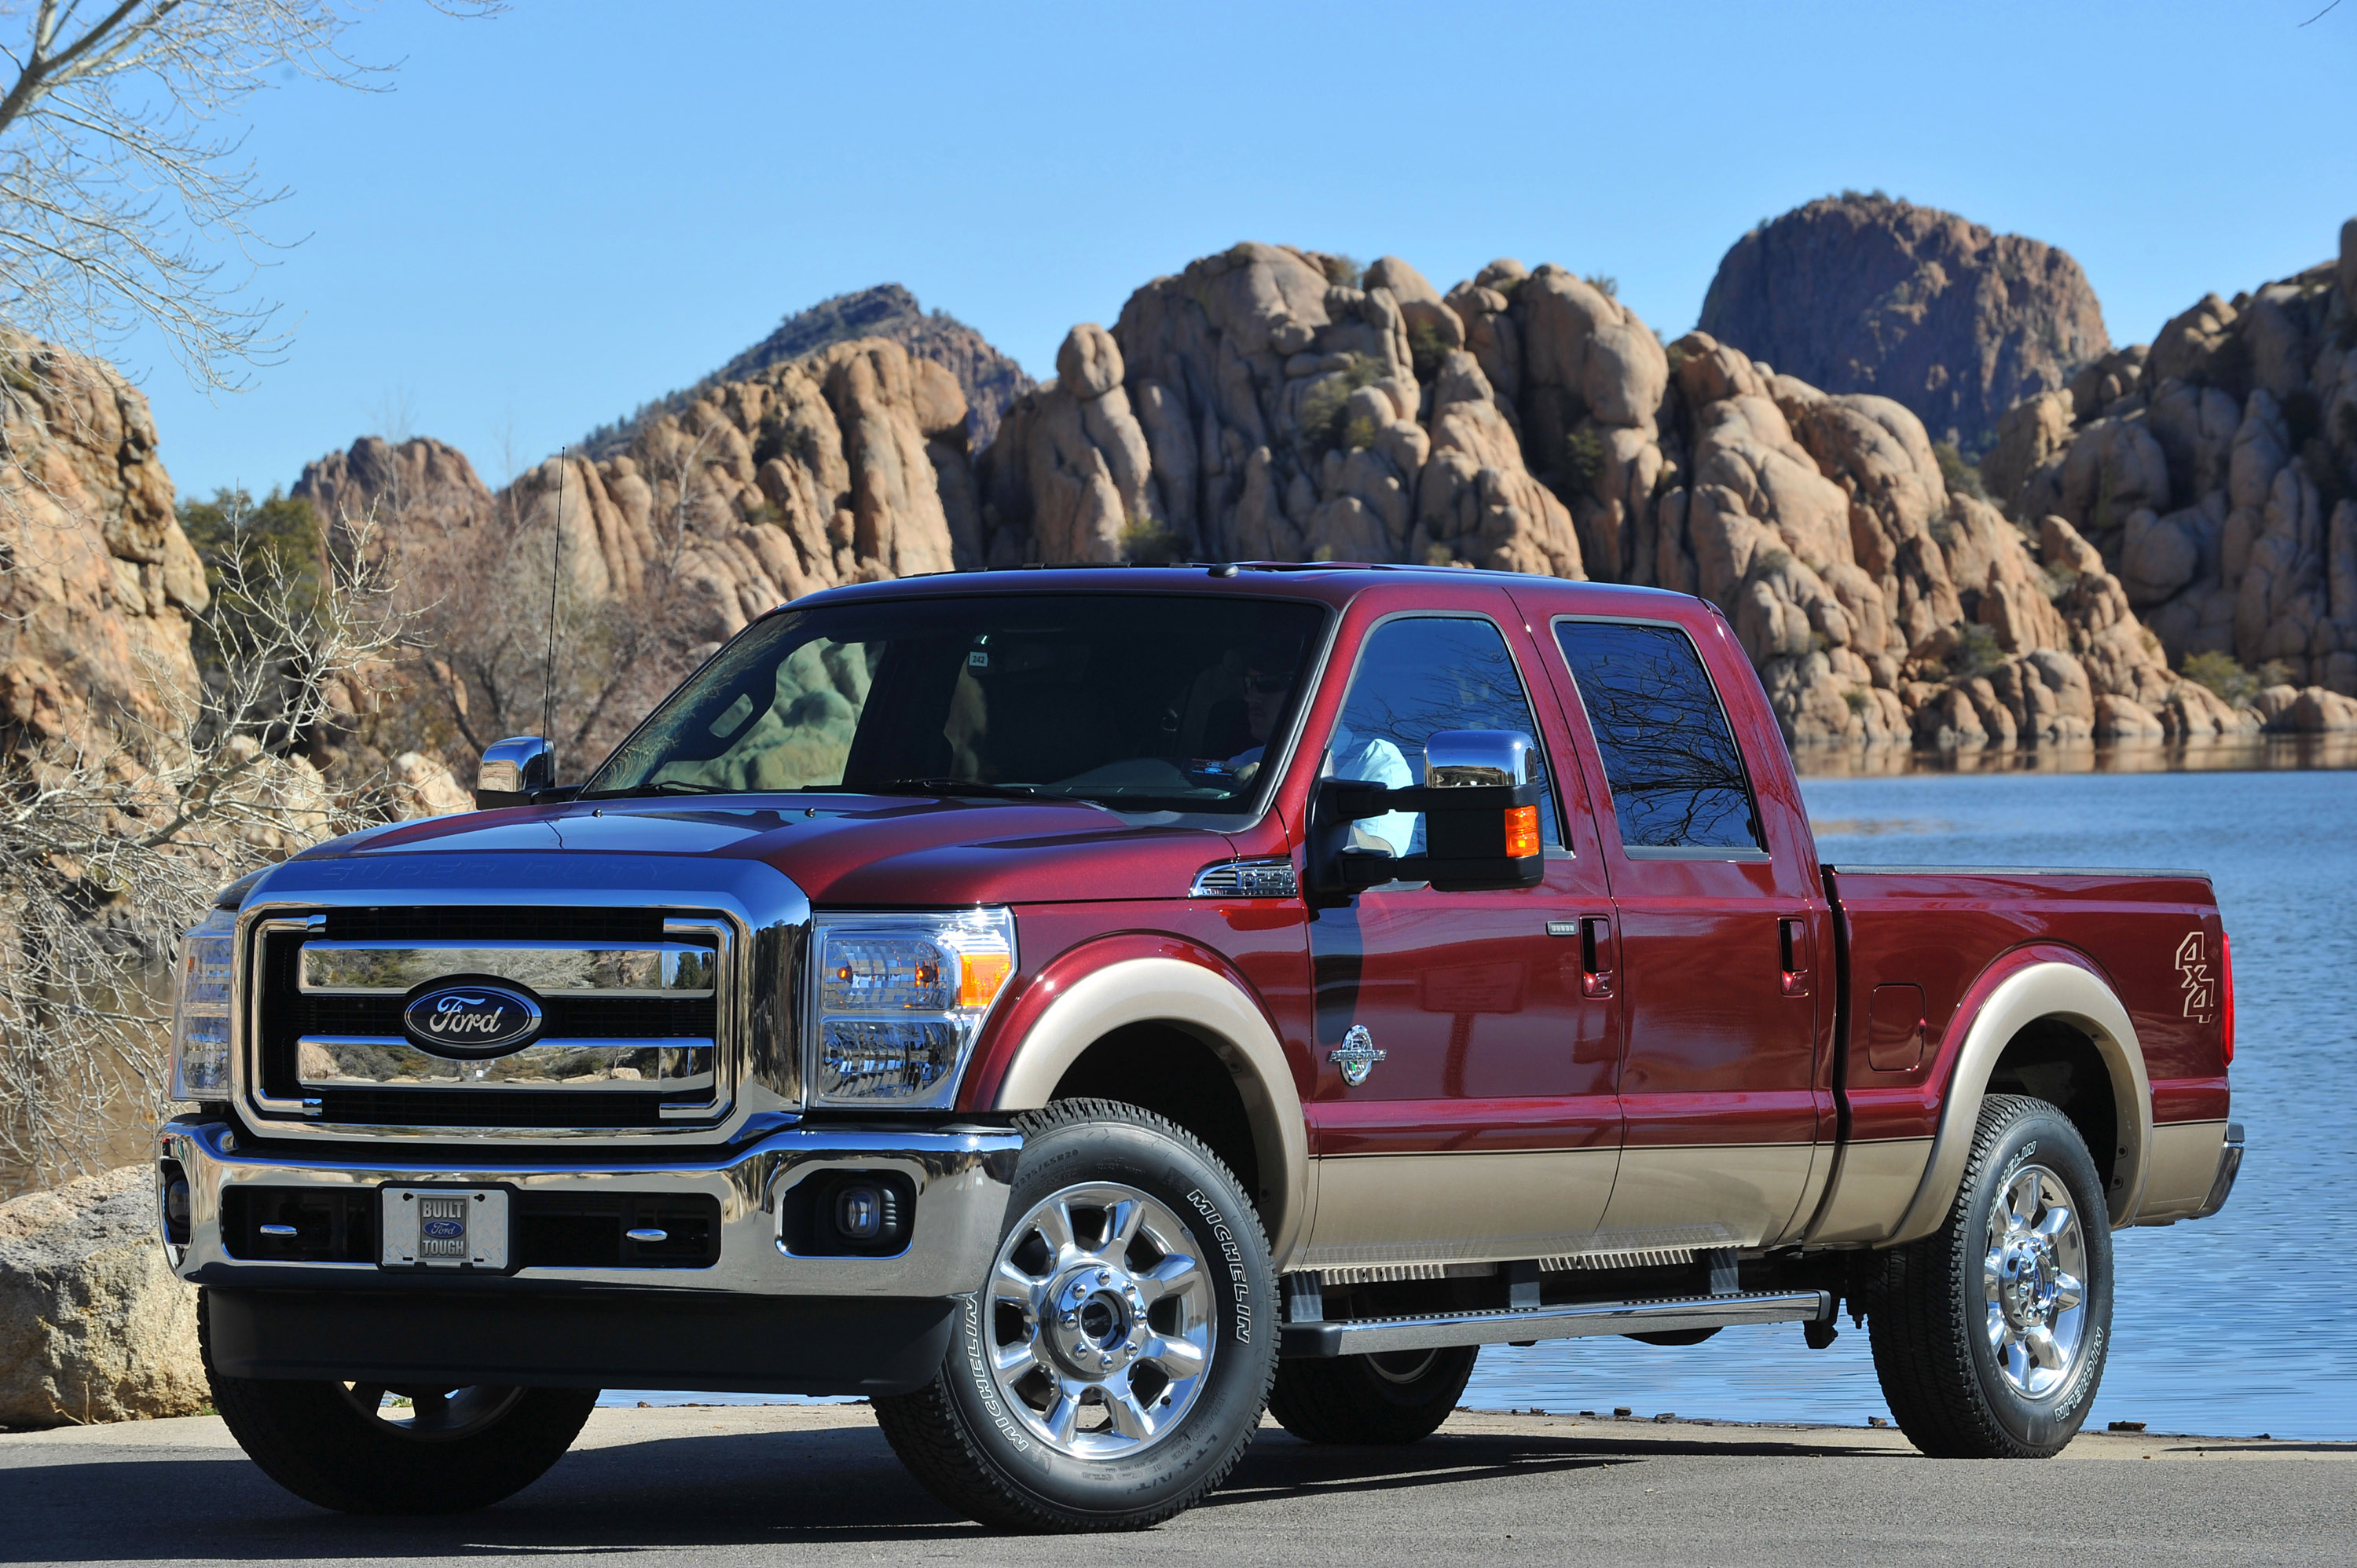 2011 Ford Super Duty Hd Pictures